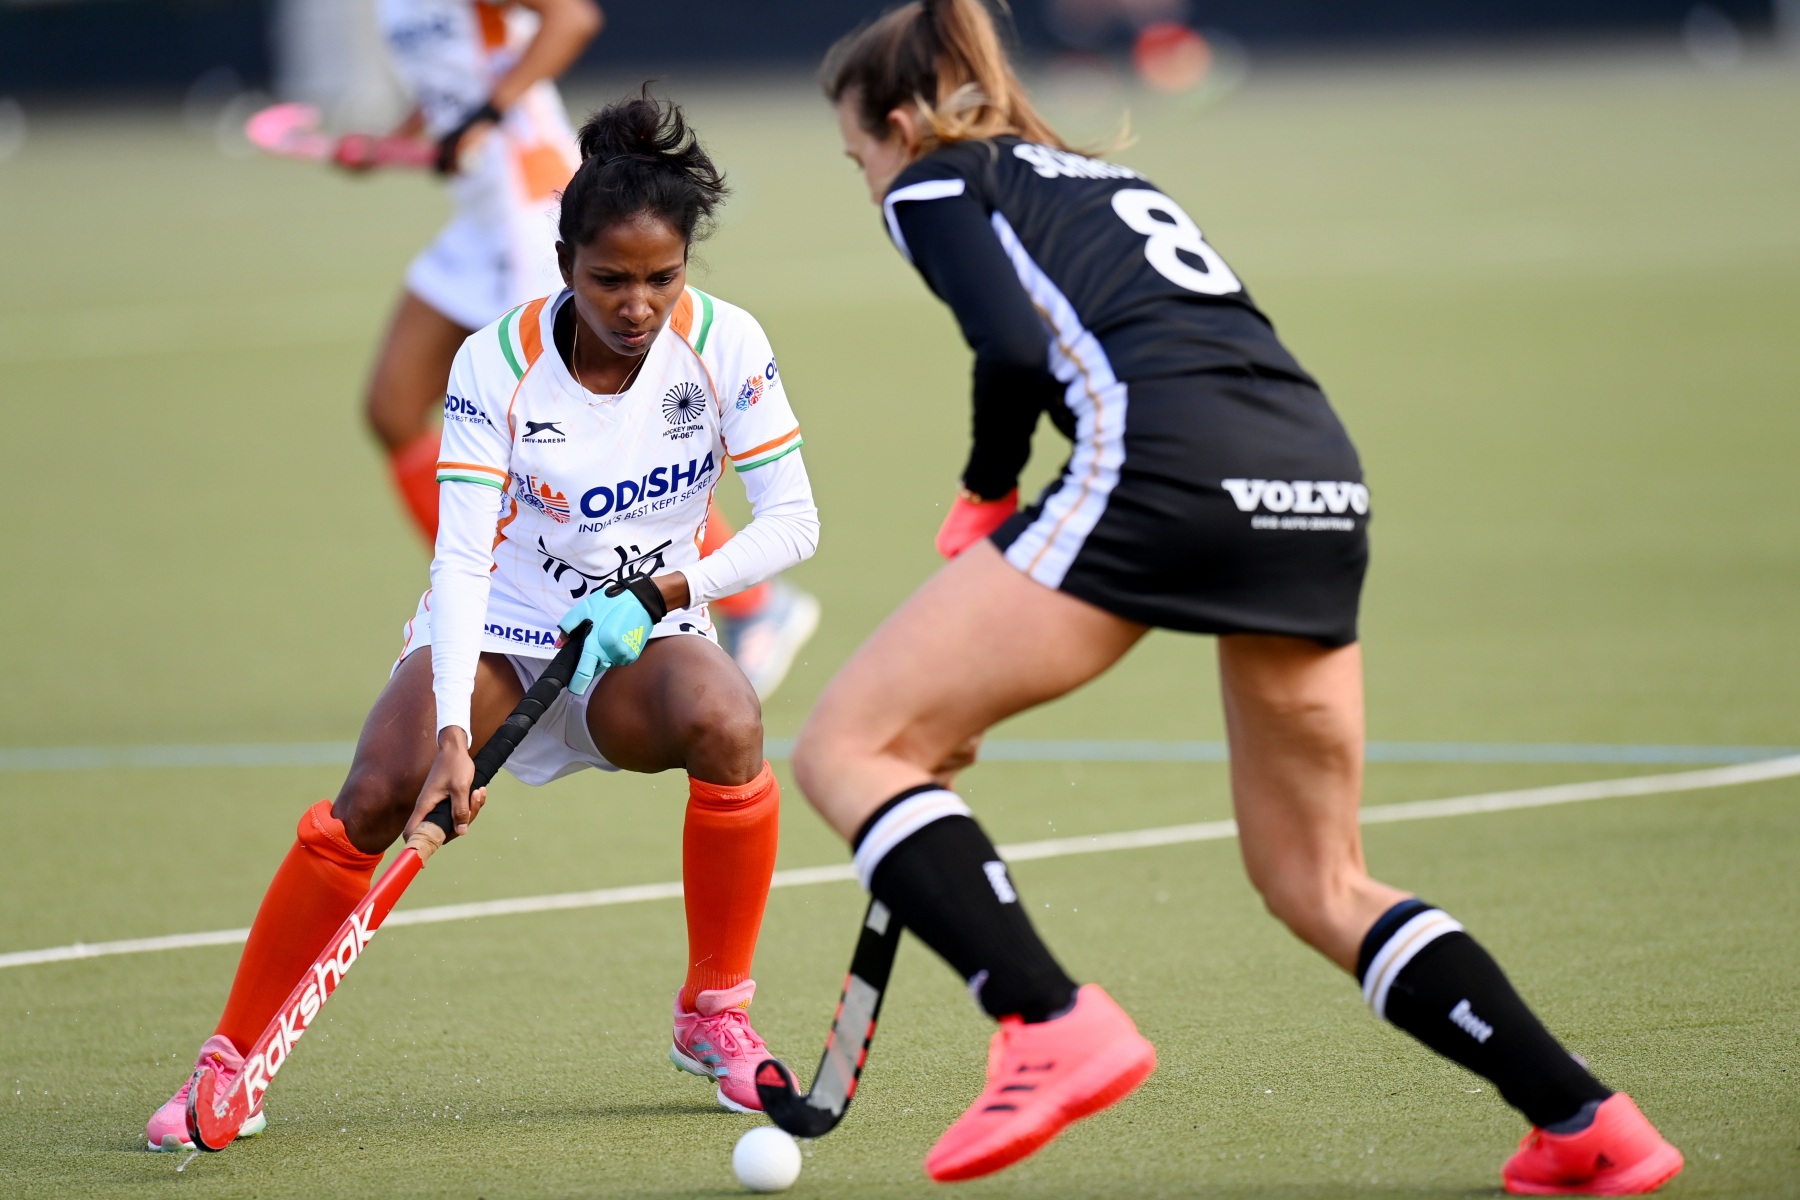 "Building on our Tokyo Olympics performance is very important for us," says Indian Women's Hockey Defender Nikki Pradhan